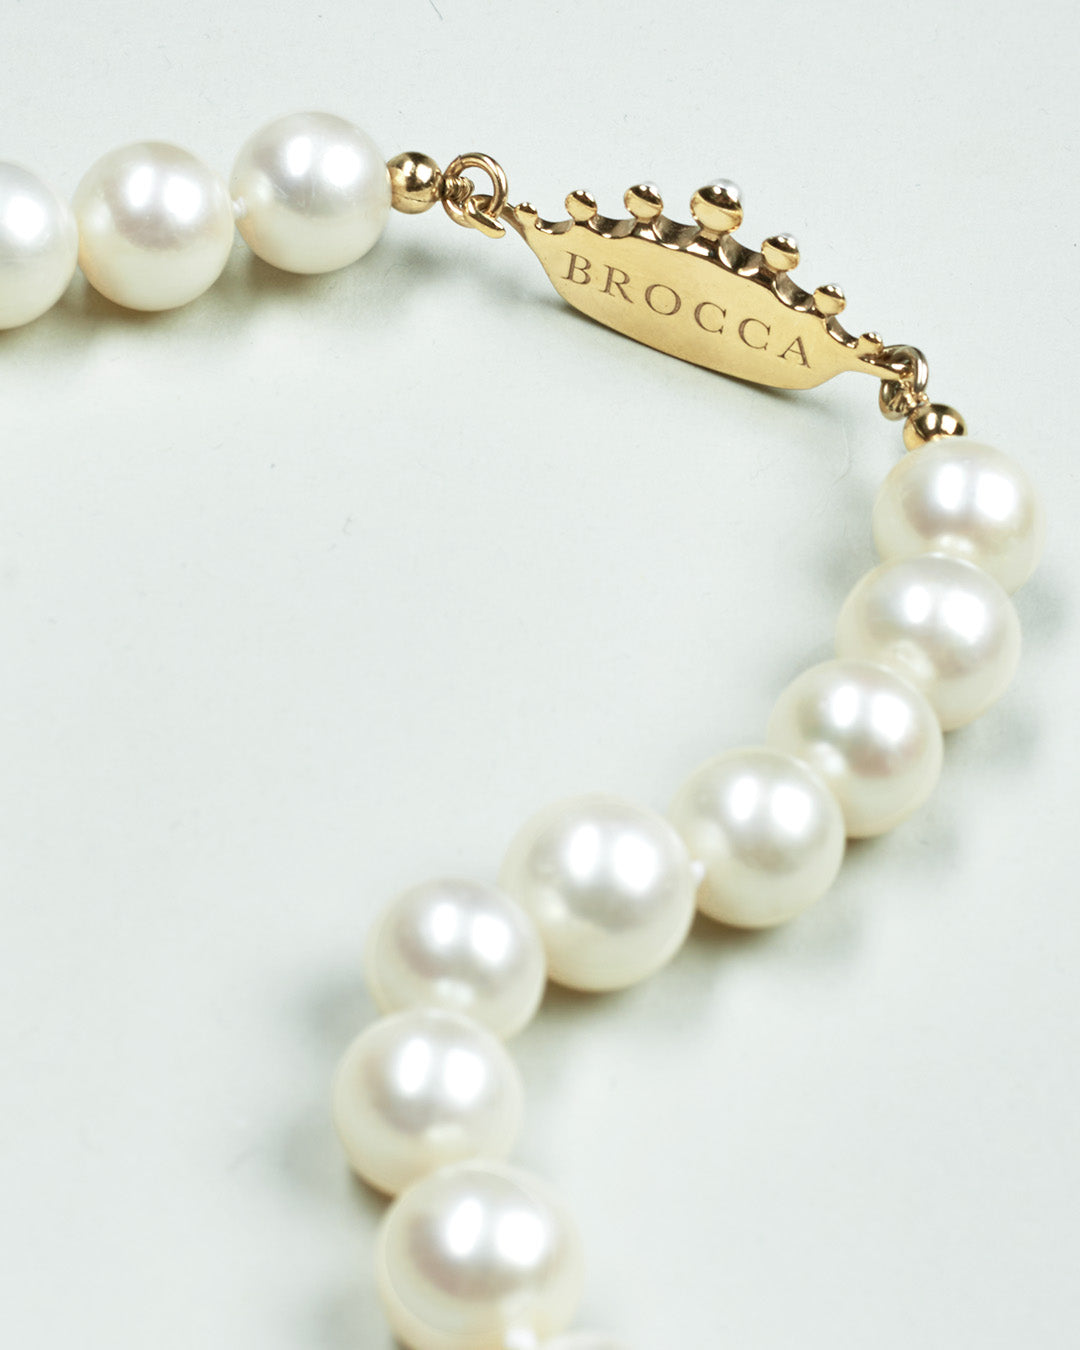 CROWN PEARL NECKLACE